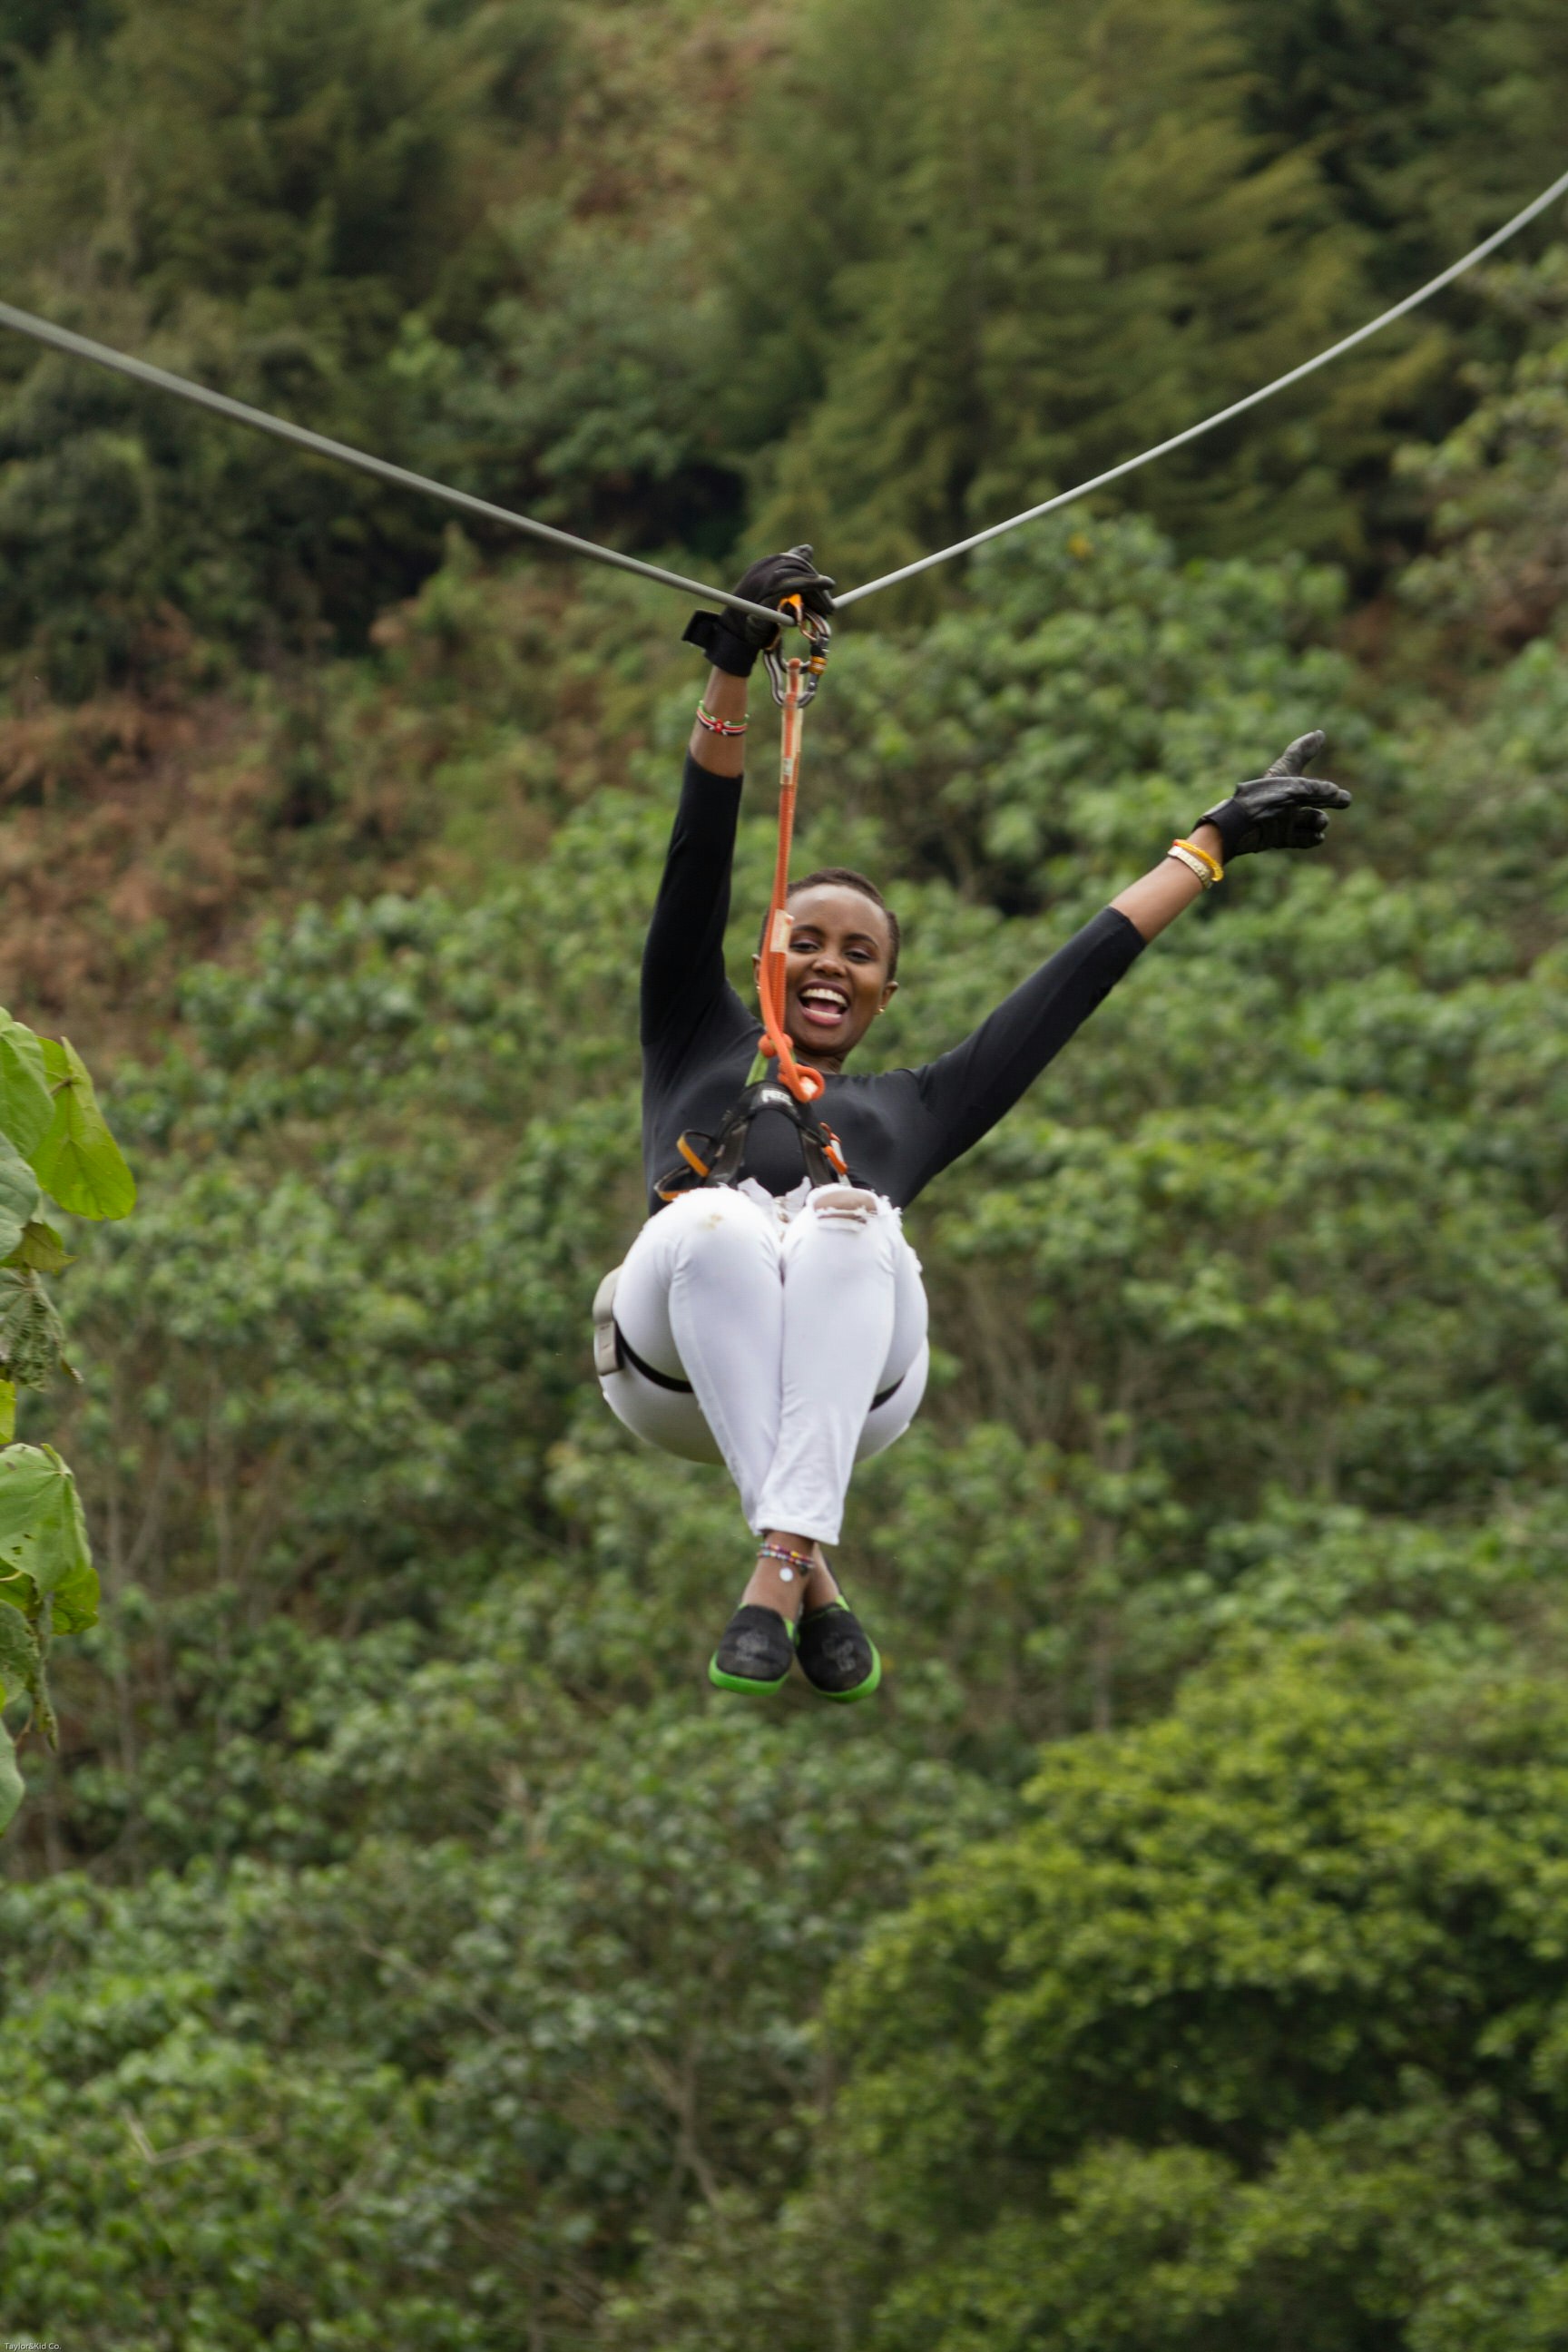 A woman smiles widely as she careers down a zip wire through the forest with one arm in the air, joyfully.